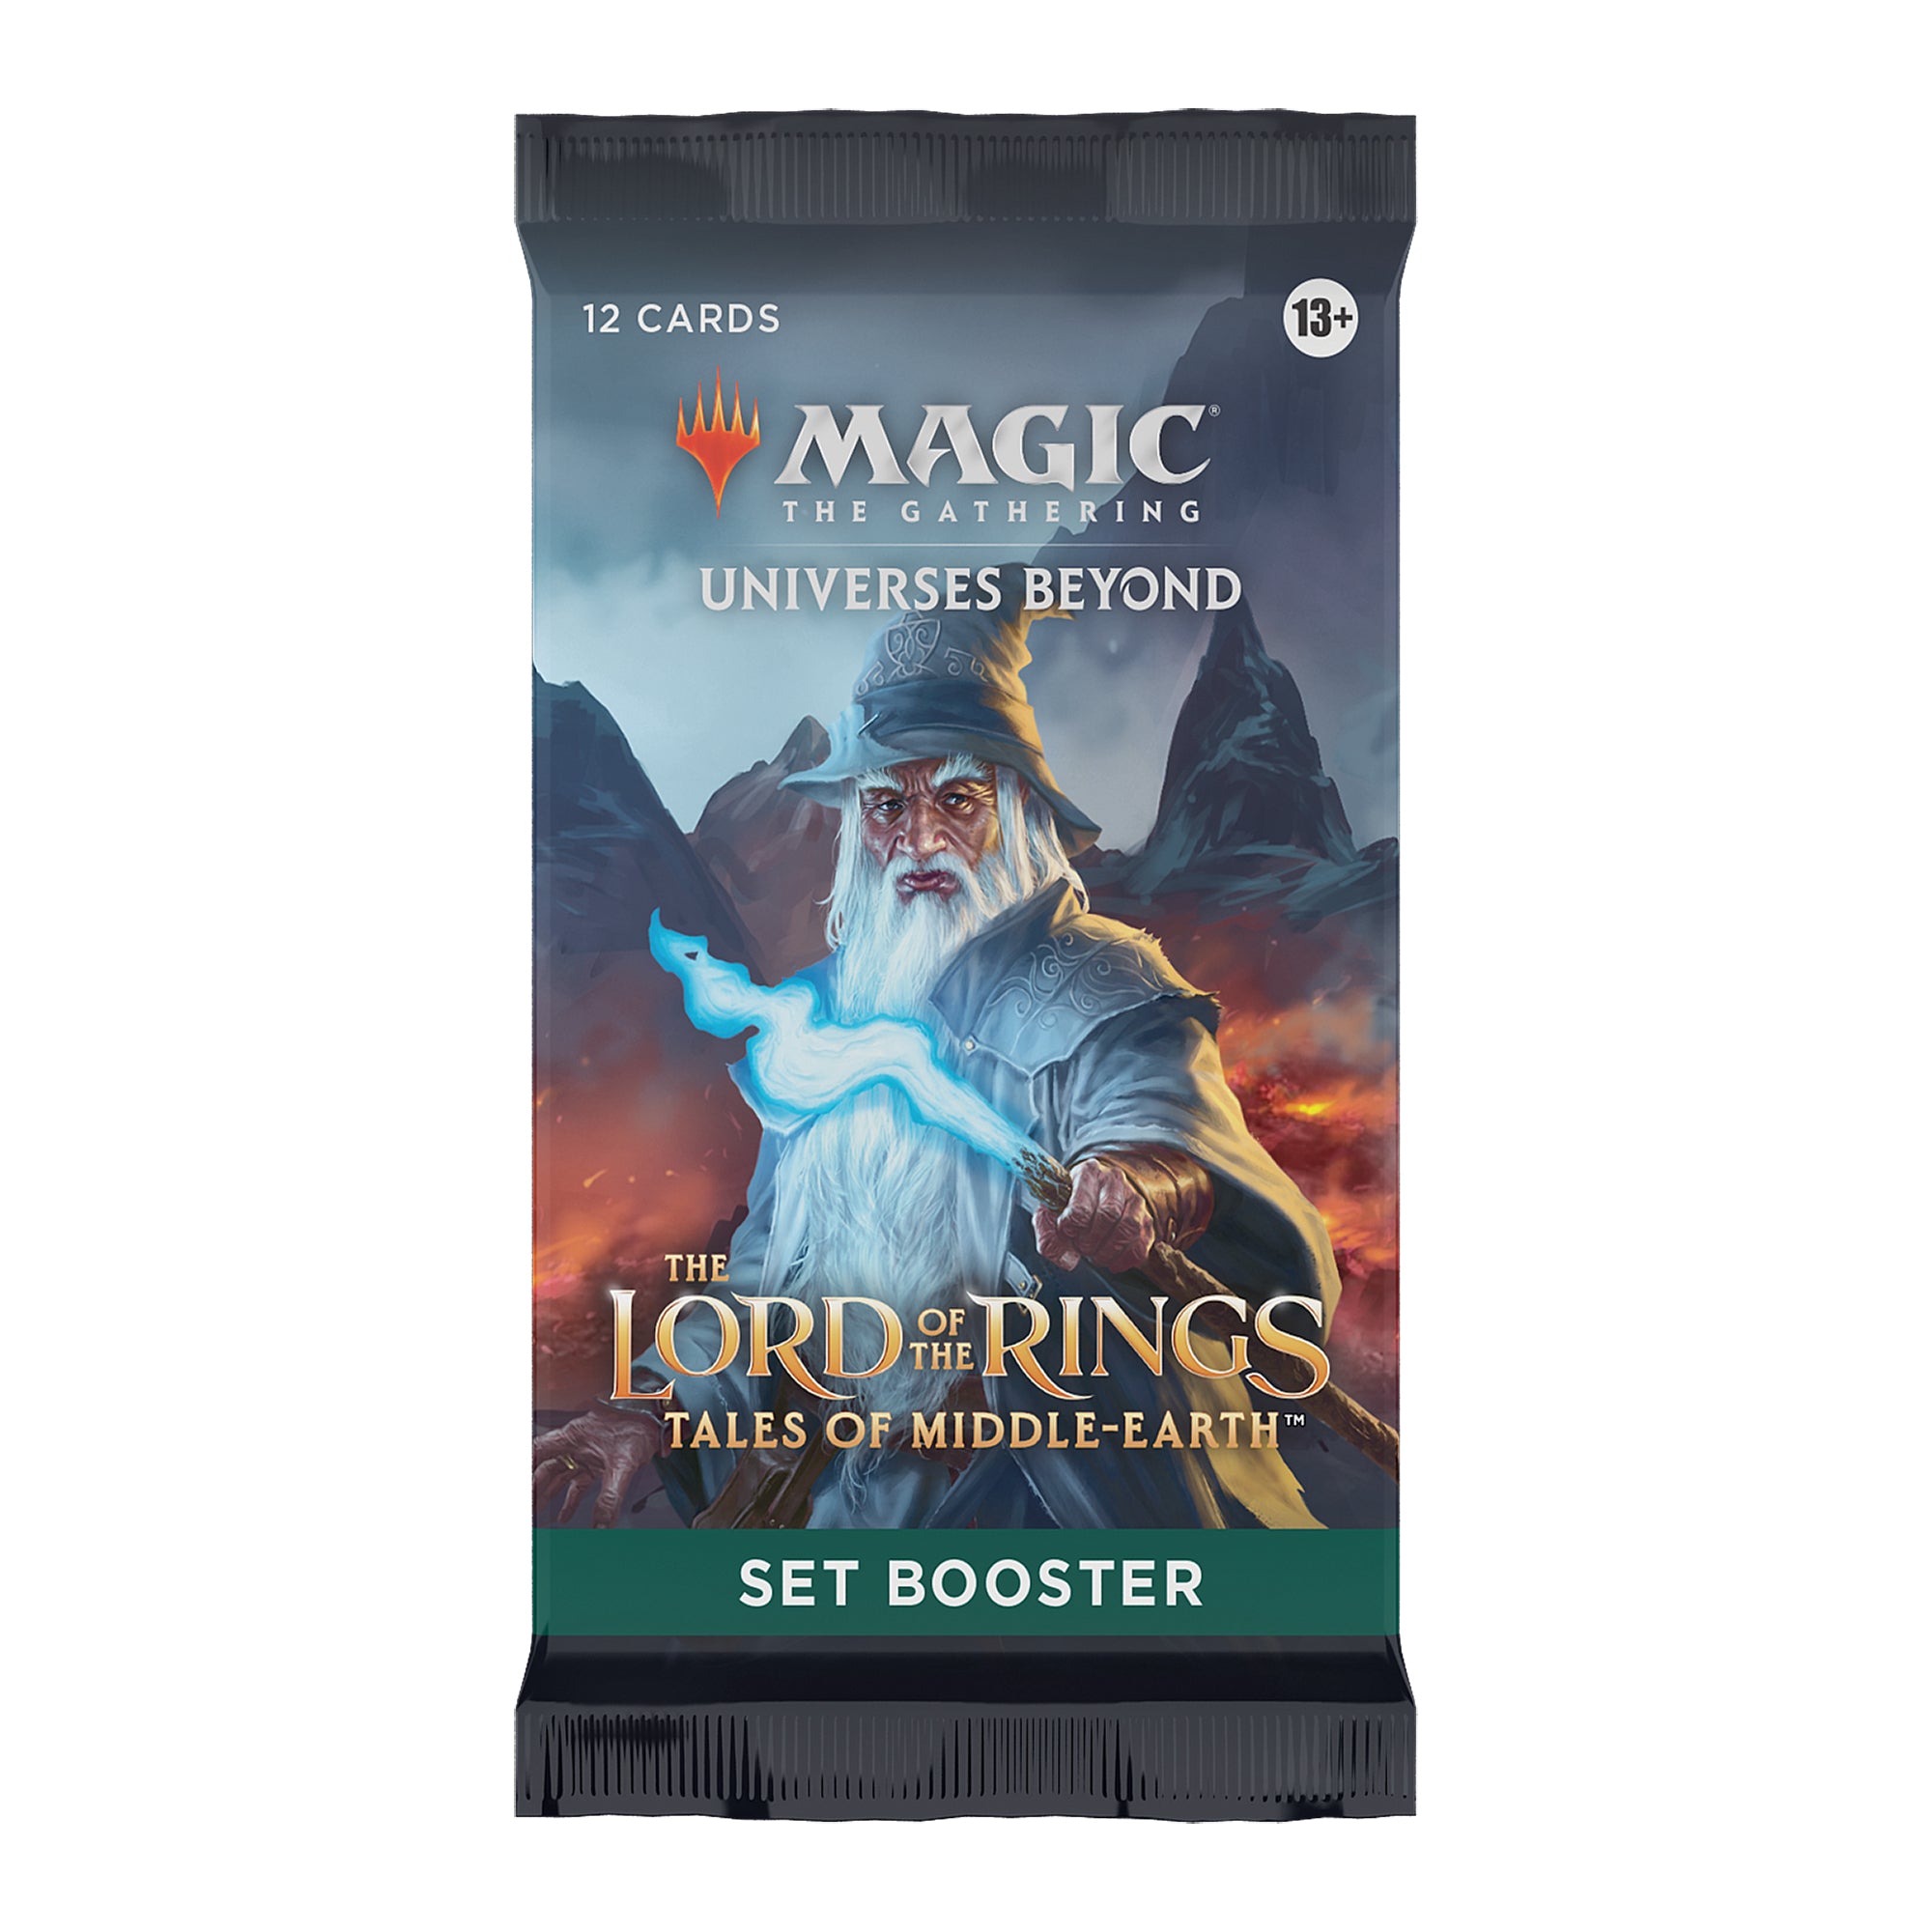 Magic: The Gathering Universes Beyond The Lord of the Rings: Tales of Middle-earth set booster pack